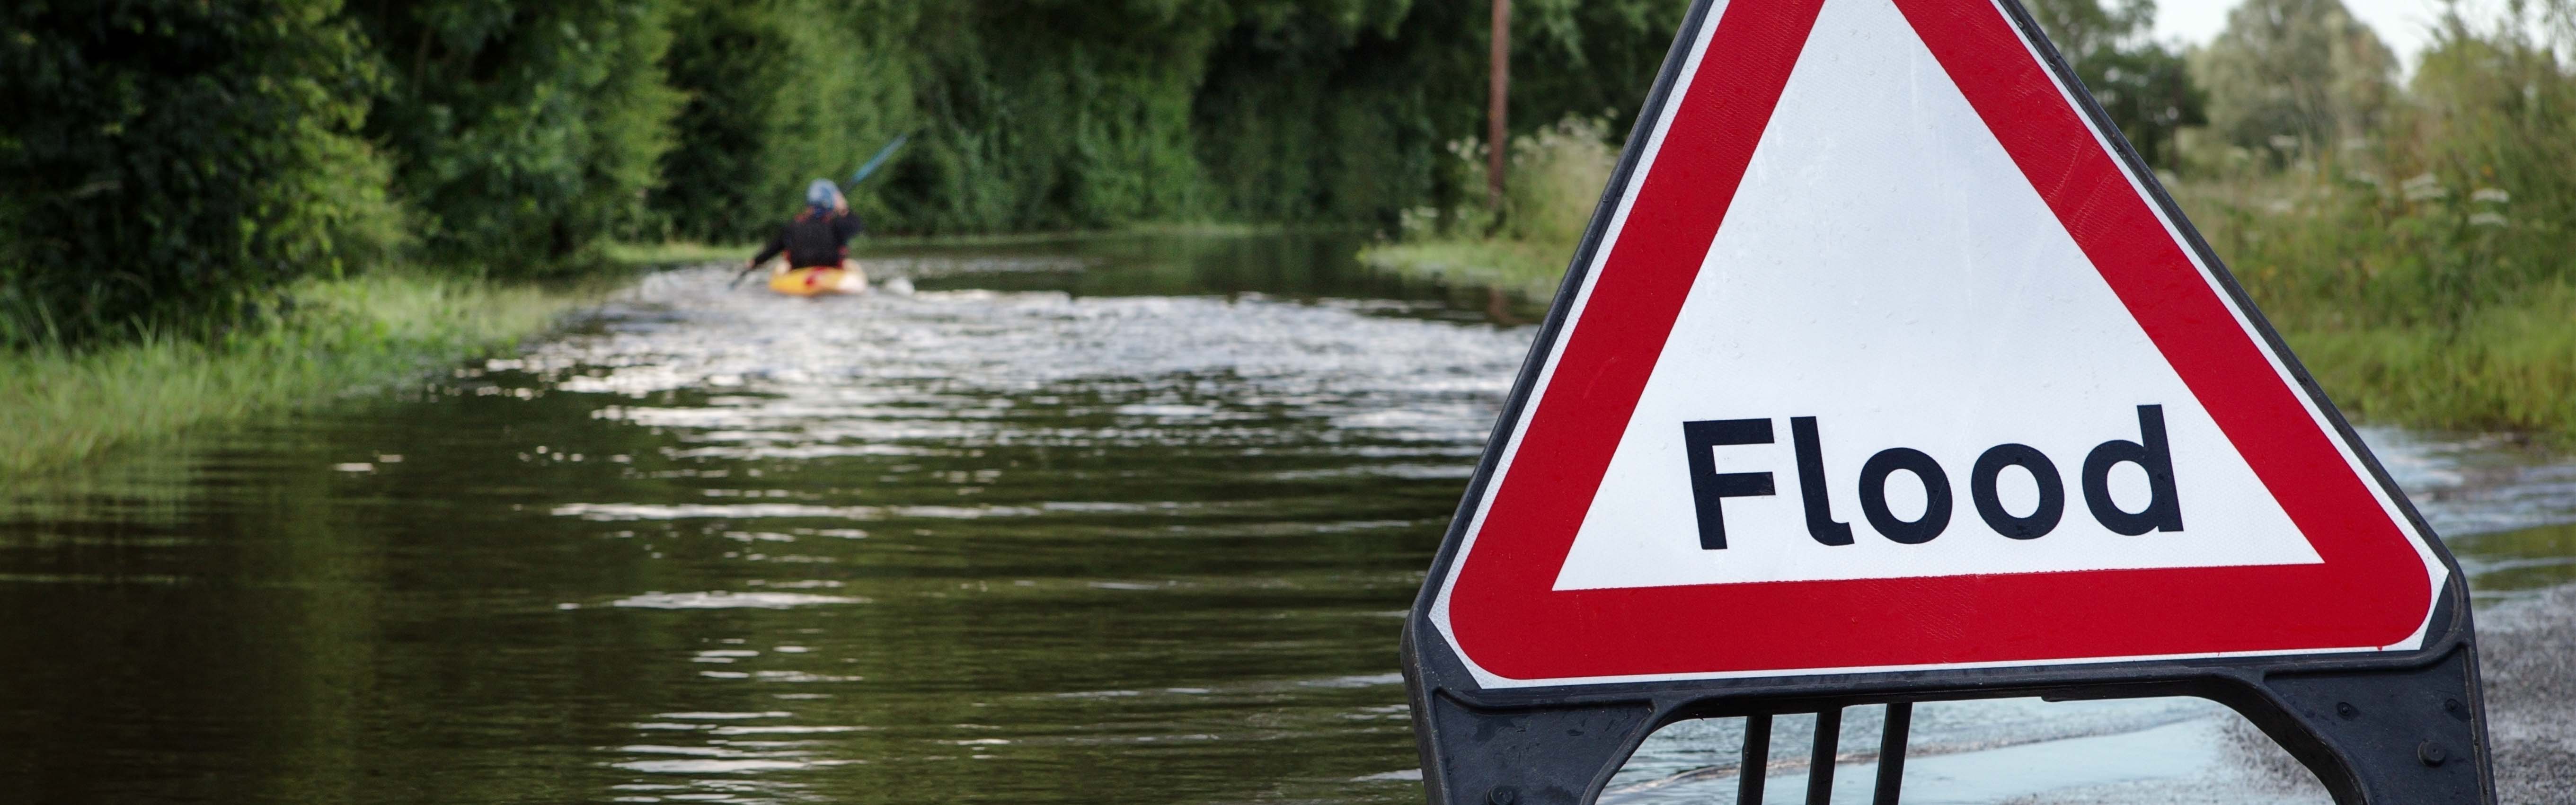 How to keep your business afloat when floods strike